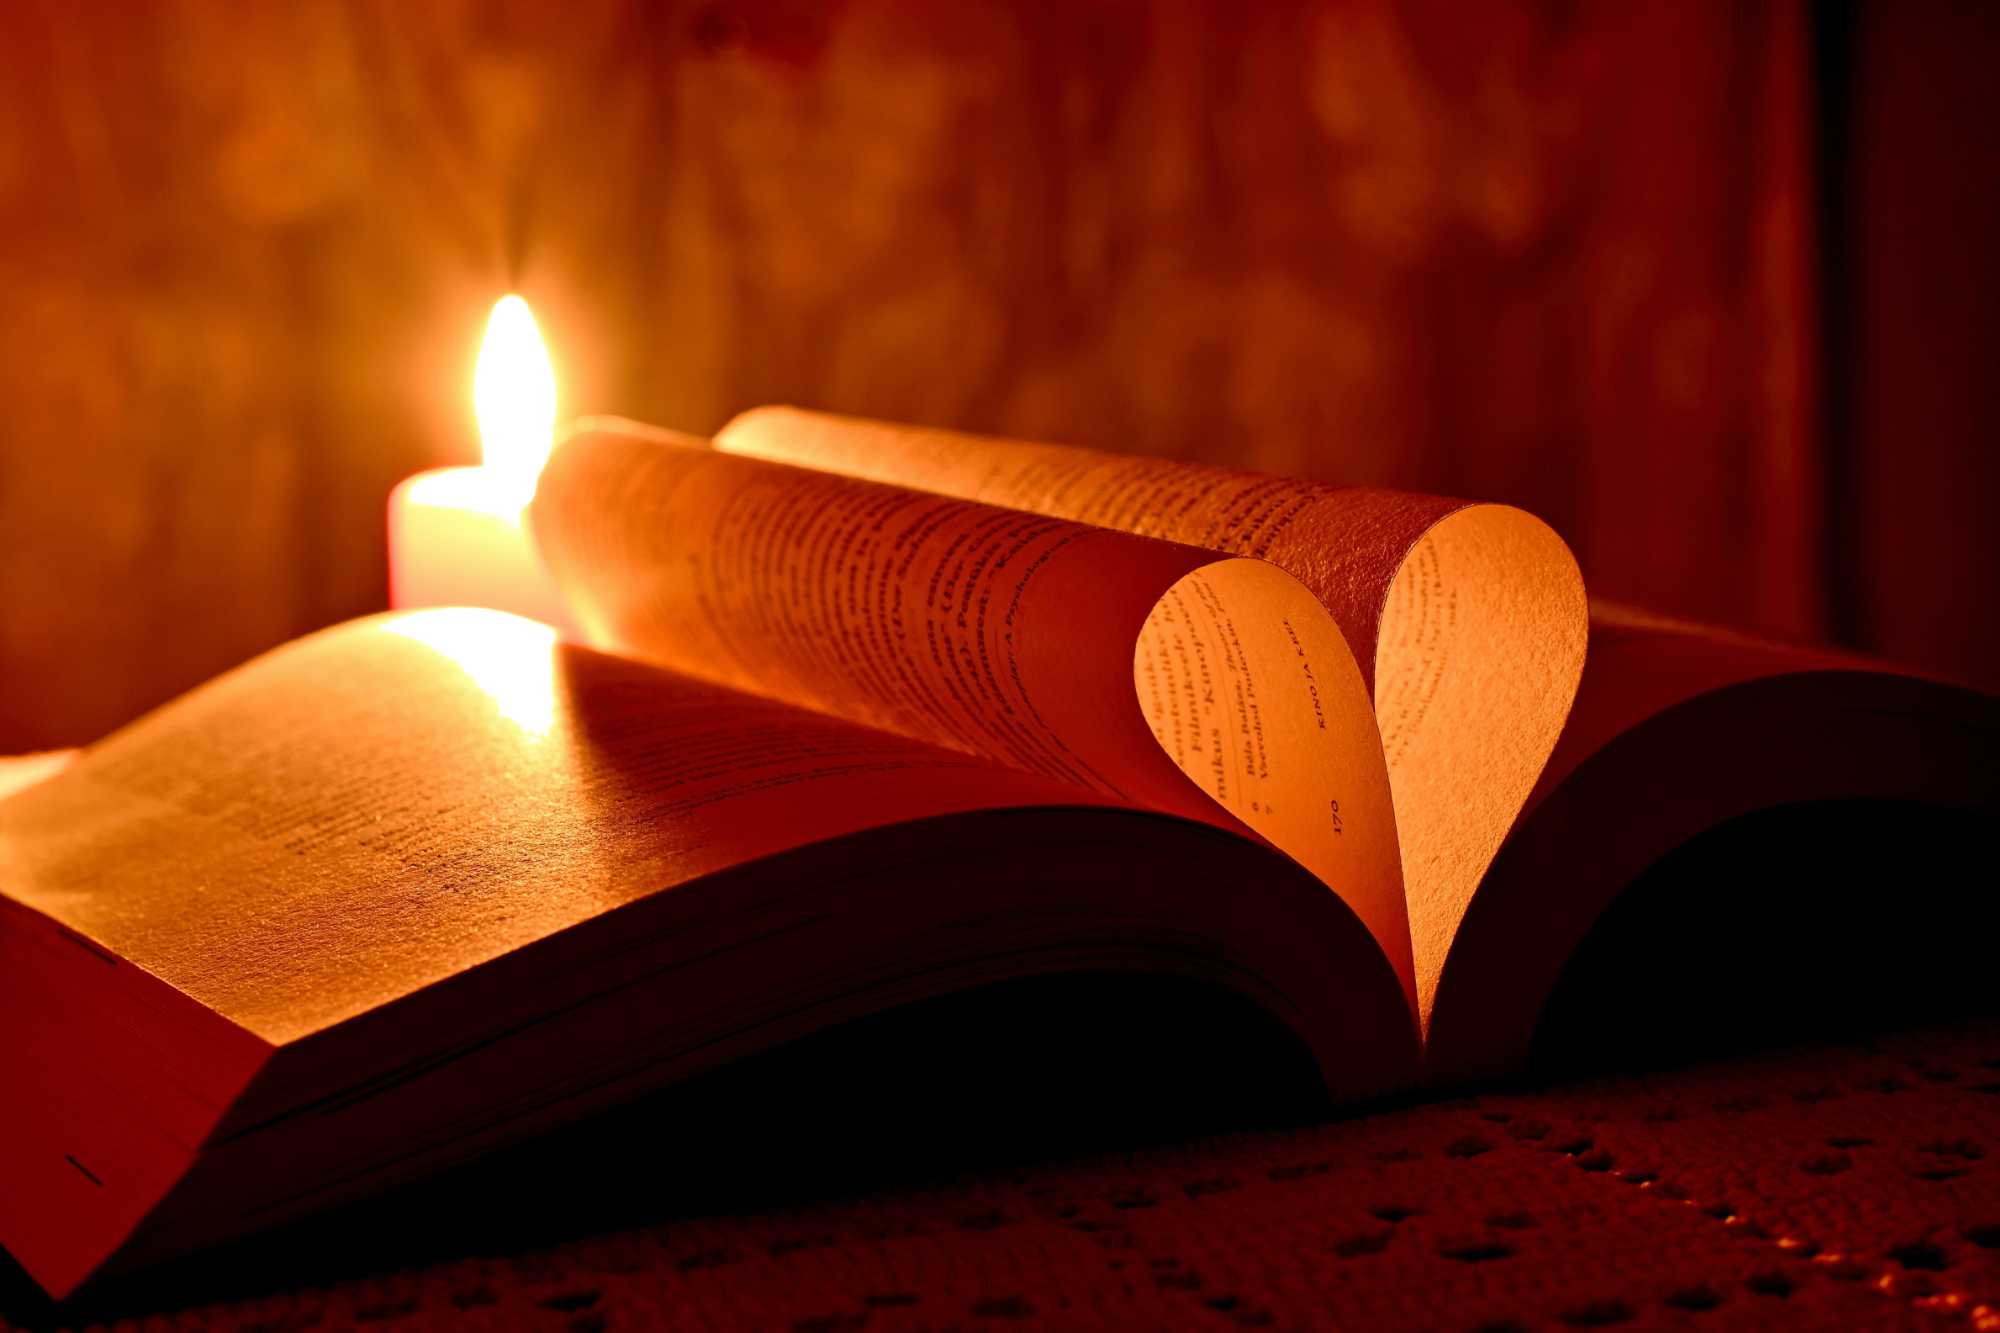 Opened book with two pages forming a heart while a candle glows in the background.